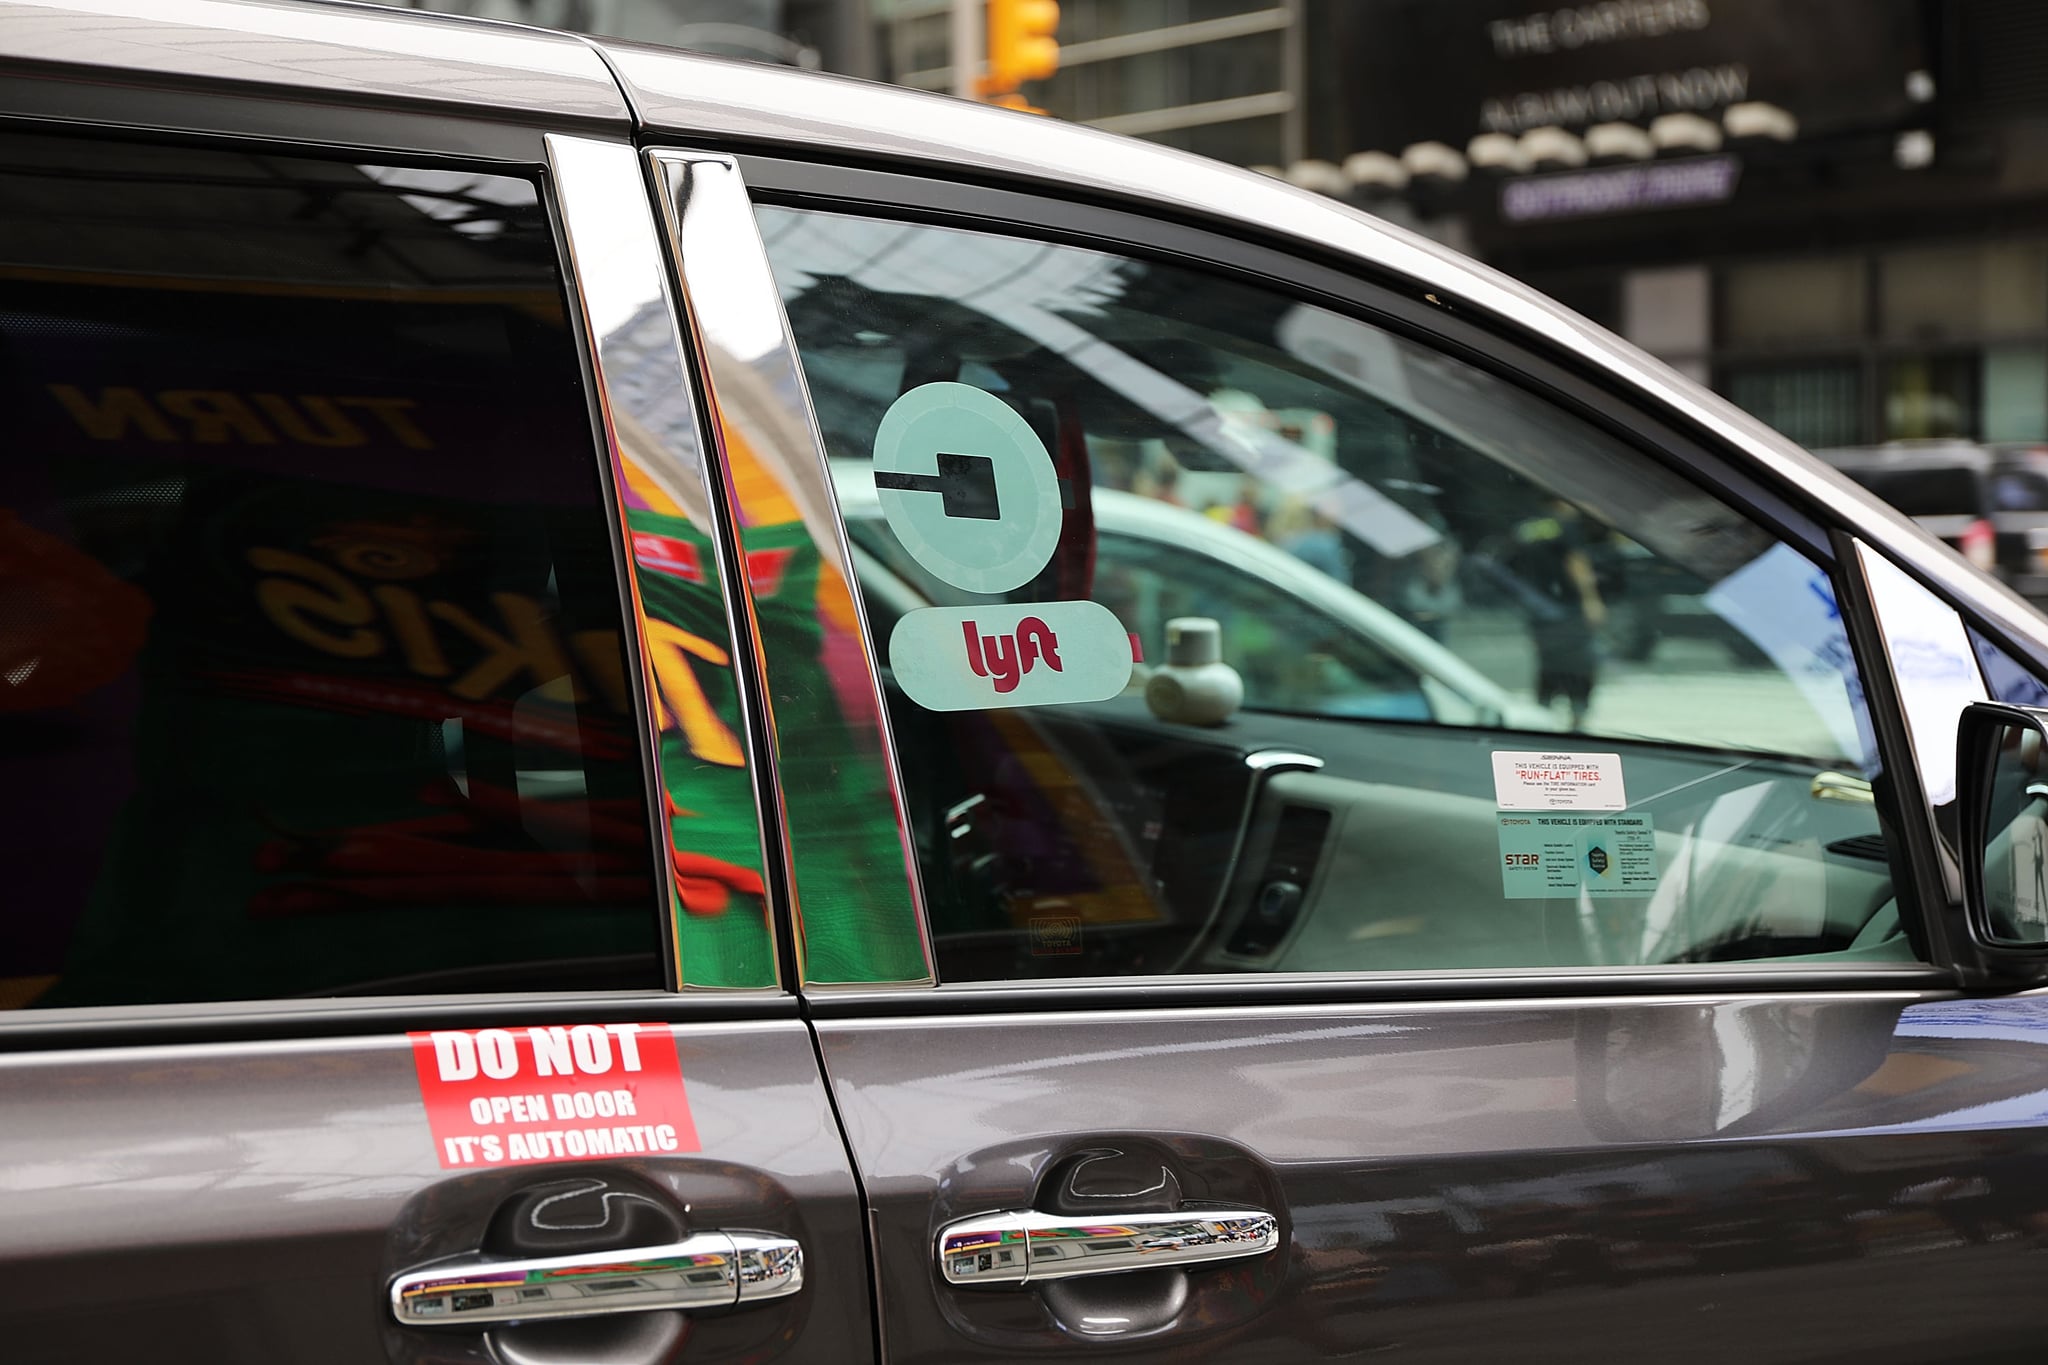 NEW YORK, NY - JULY 30:  A Lyft ride hailing vehicle moves through traffic in Manhattan on July 30, 2018 in New York City. After a significant increase in local traffic and a spate of suicides by taxi drivers, New York City is planning to vote on capping ride-sharing services such as Uber and Lyft. The  City Council's move to vote on the measures could come as soon as Aug. 8. If the vote was to succeed, New York City would become the first major U.S. municipality to cap ride-sharing services.  (Photo by Spencer Platt/Getty Images)